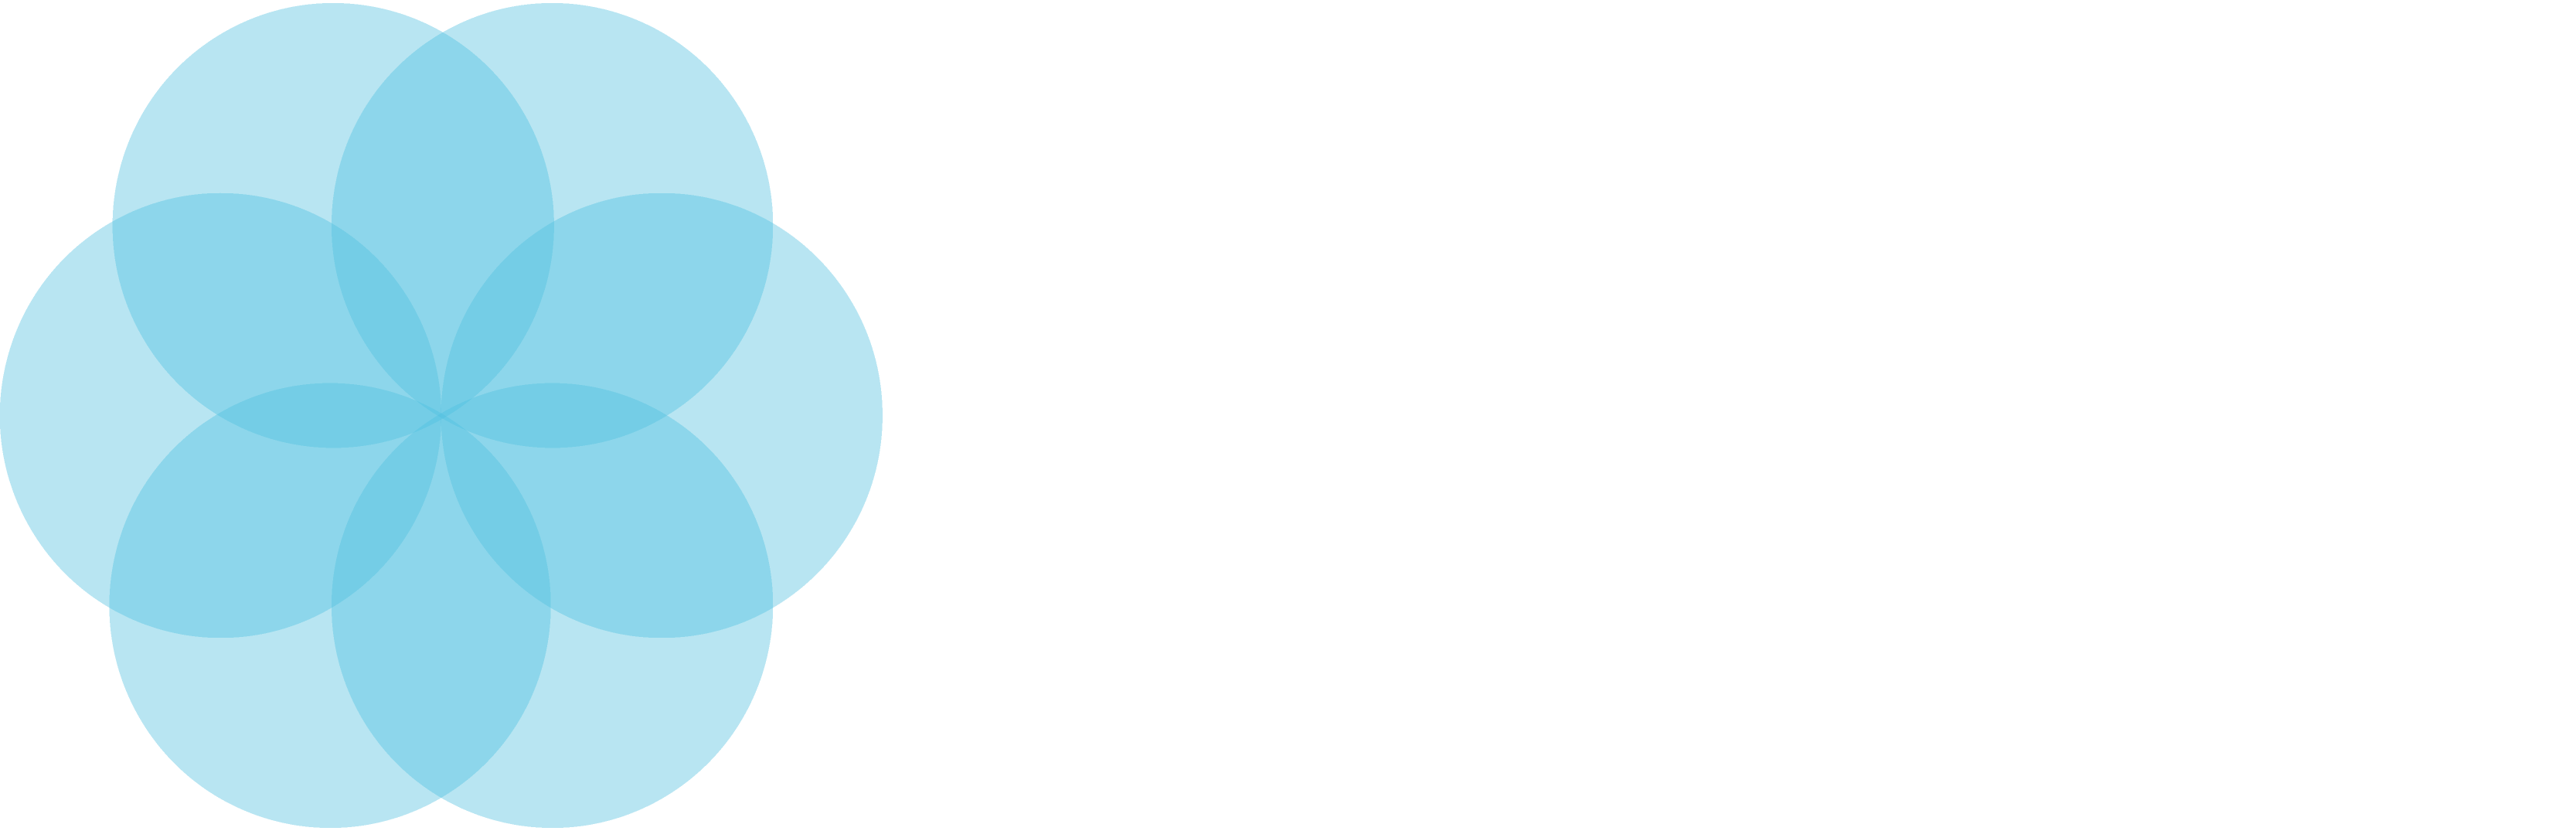 Salsify Logo - Salsify Product Content Management | 30 Day Free Trial | Salsify ...